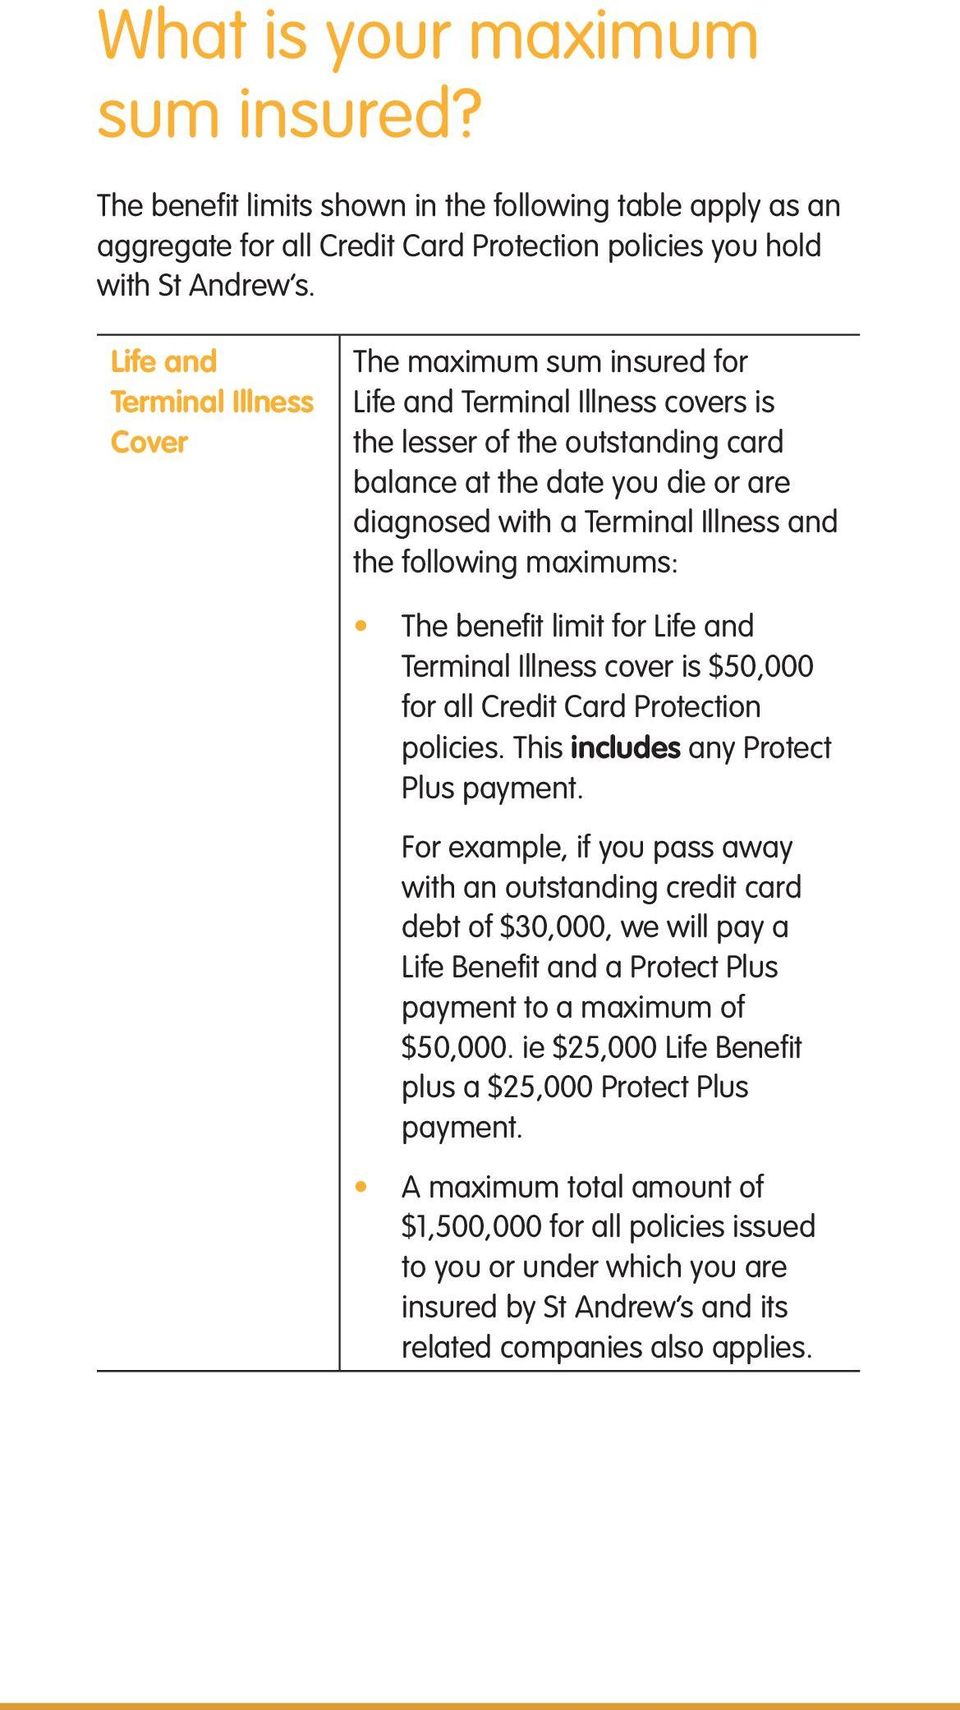 and the following maximums: The benefit limit for Life and Terminal Illness cover is $50,000 for all Credit Card Protection policies. This includes any Protect Plus payment.